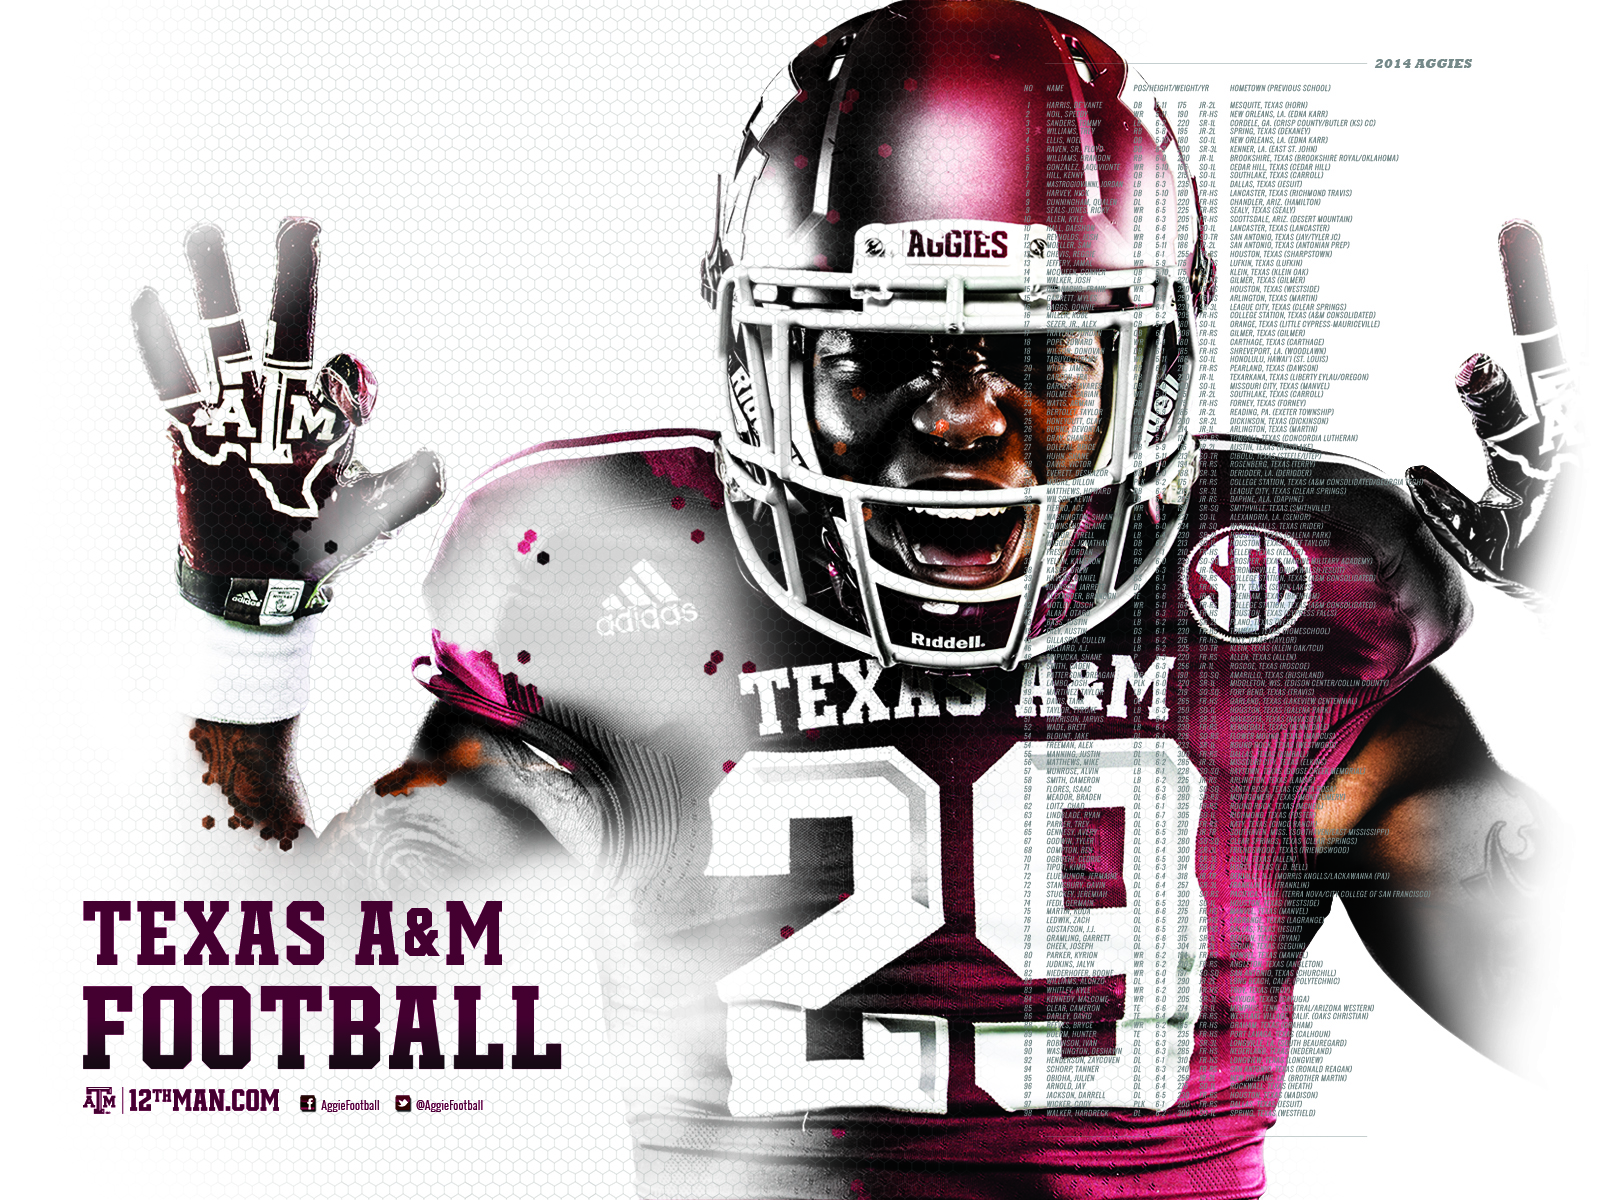 Texas AM Wallpapers Browser Themes More for Aggie Fans